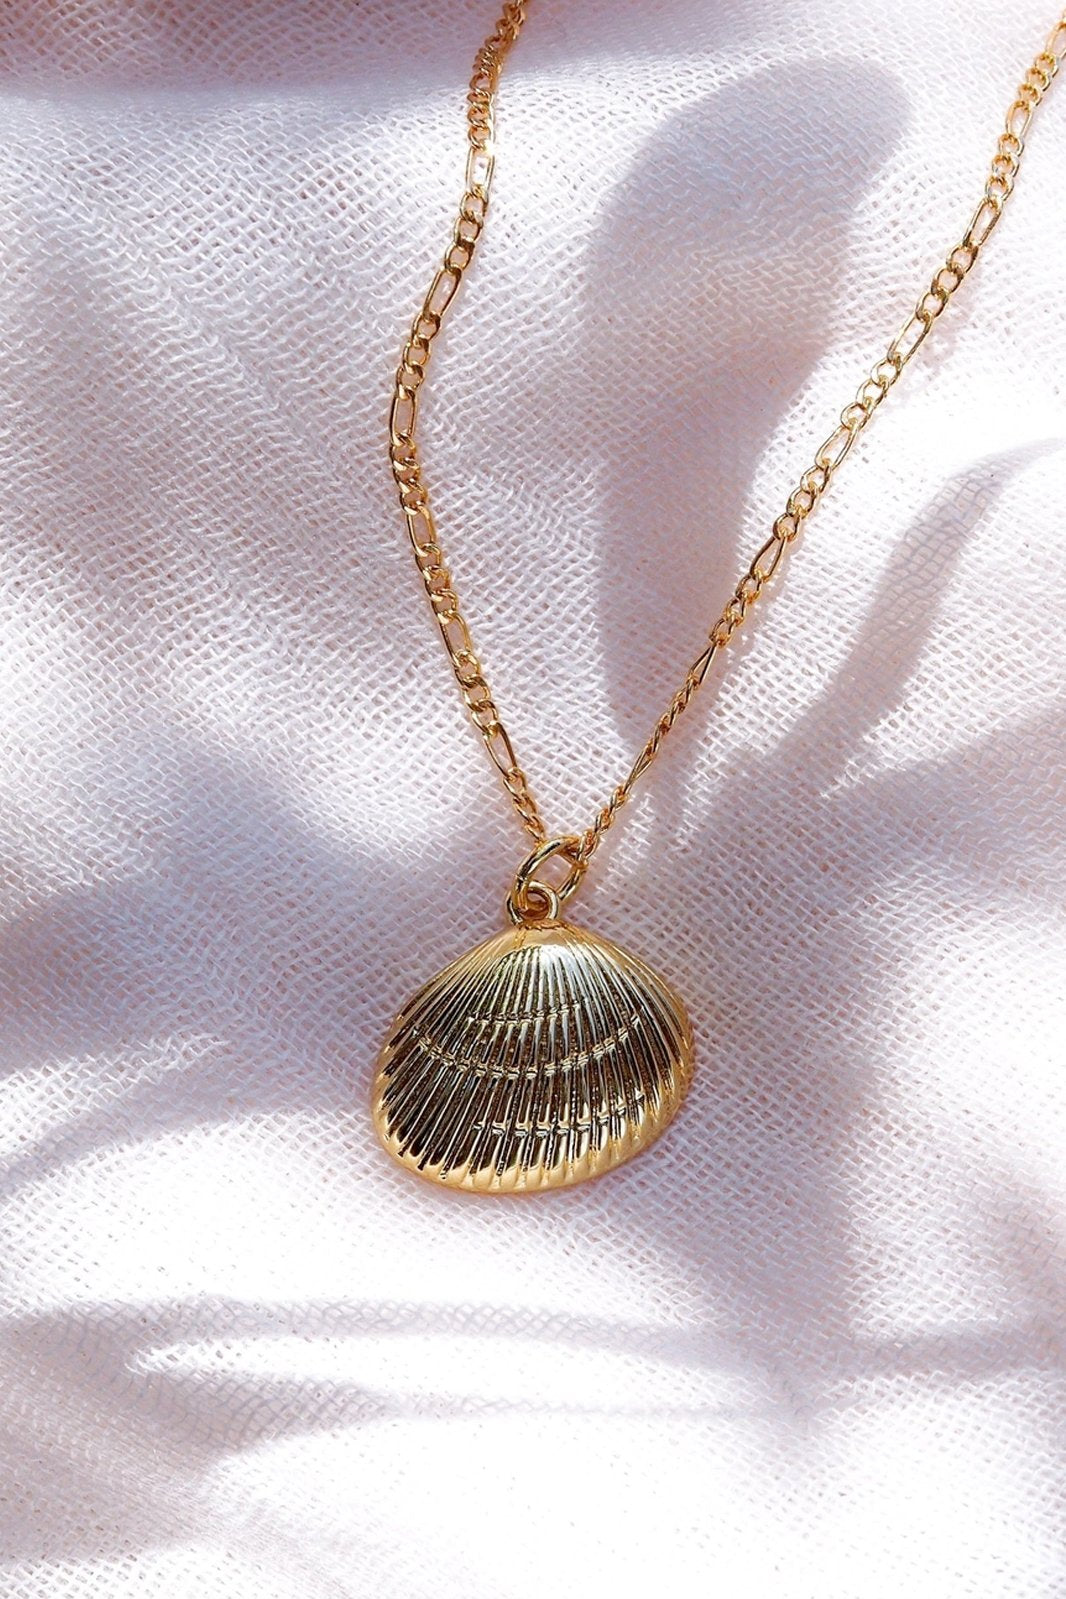 GOLD SEA SHELL NECKLACE - KEONE - 16" - OS -